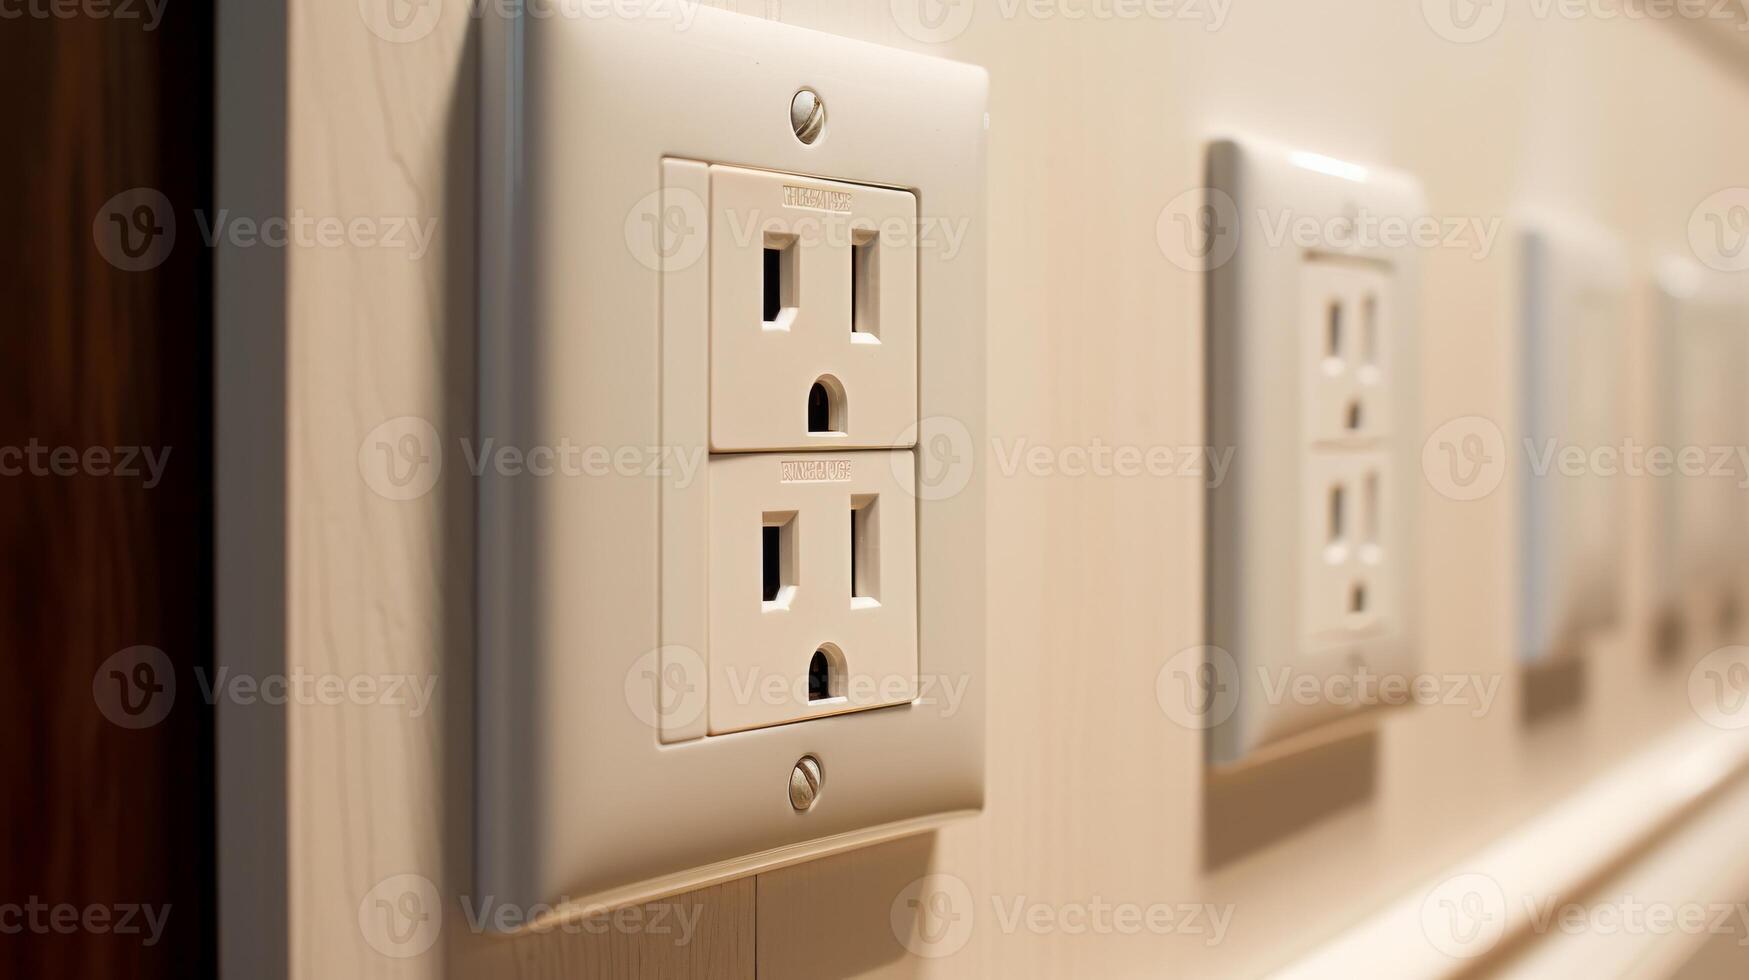 White wall mounted socket board with two electrical sockets and a switch. Neural network photo